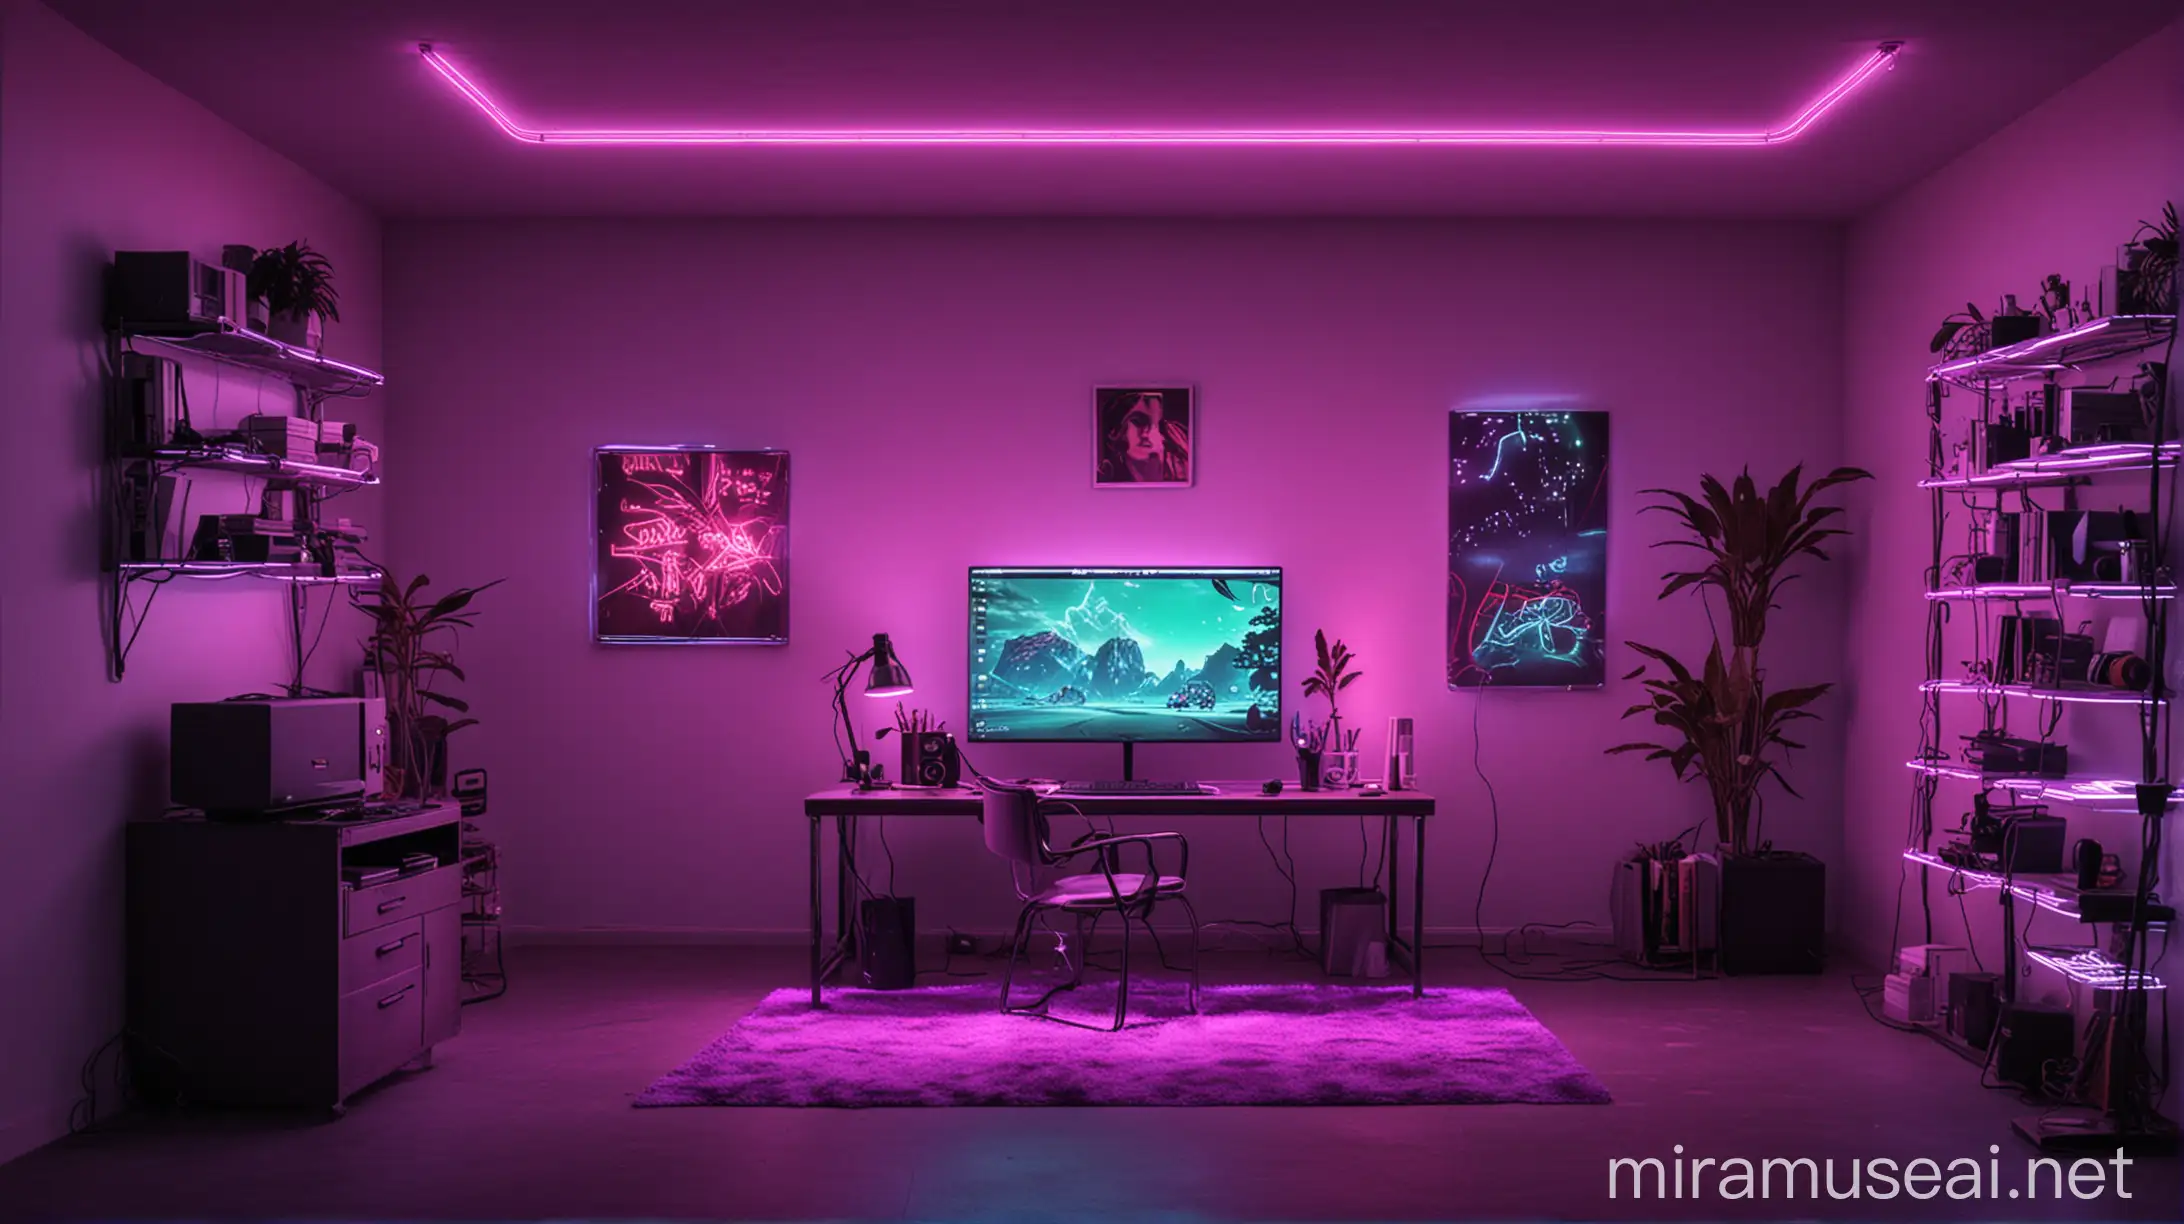 Create a Computer environment room with neon lights